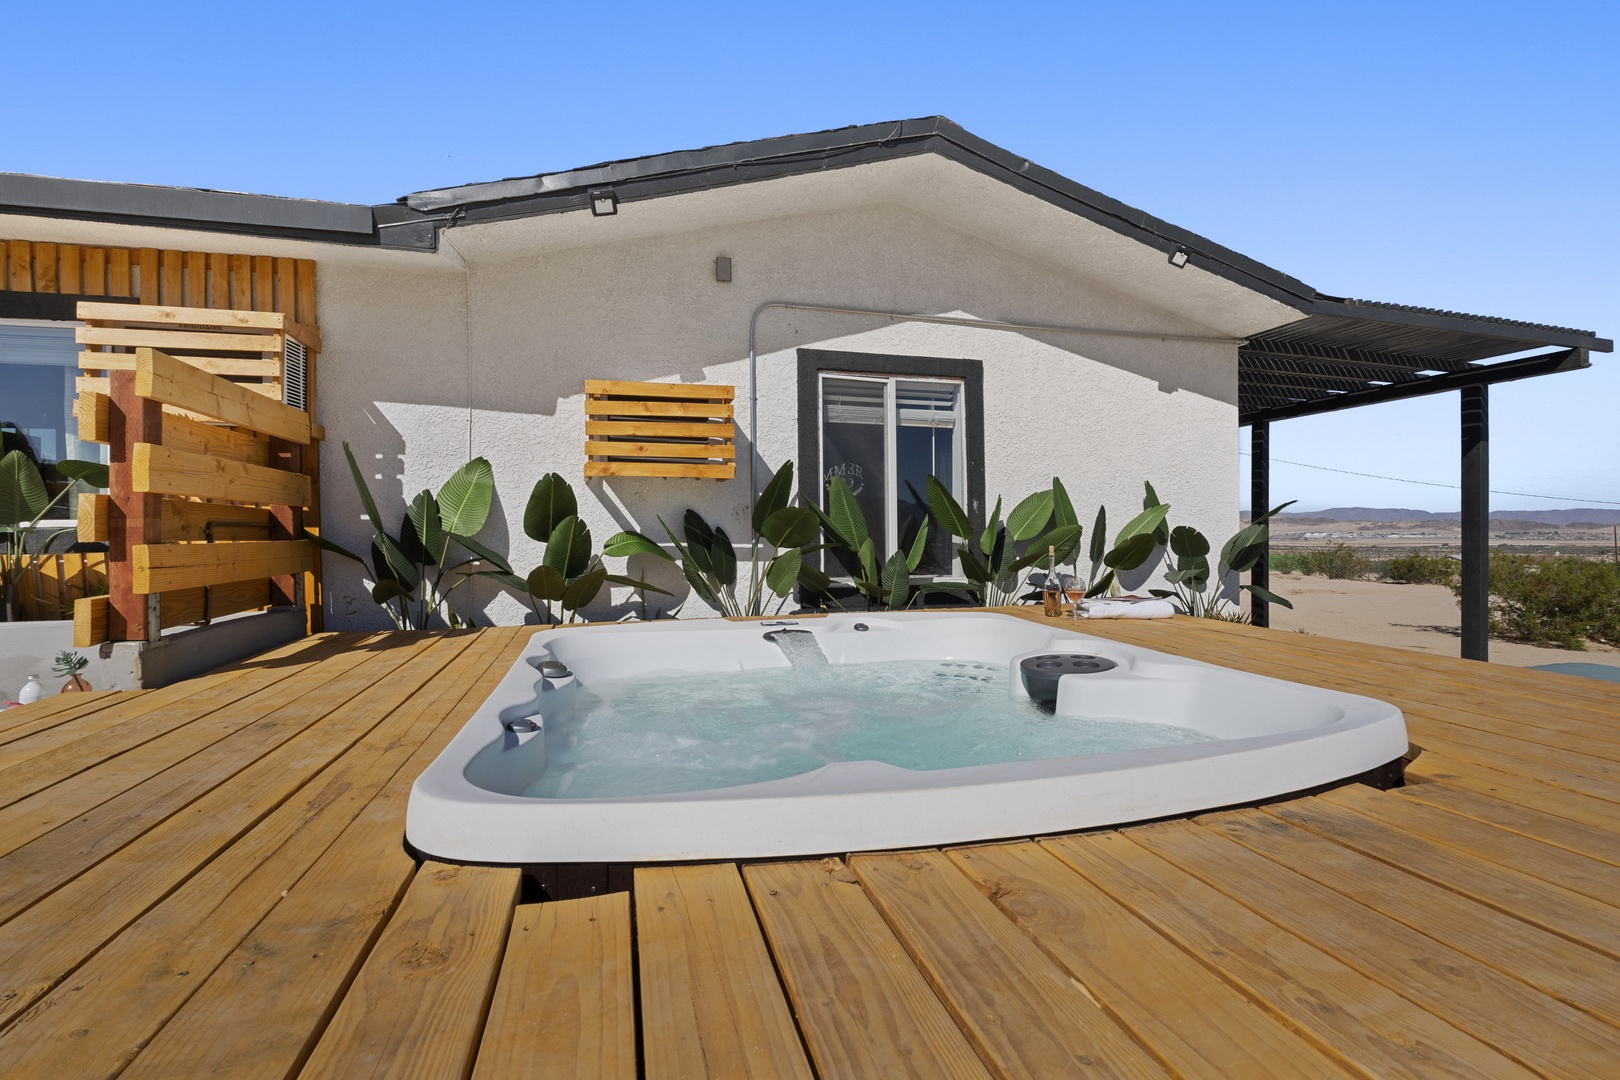 2nd side yard with sun bathing mats, large hot tub deck, outdoor tub, and shower